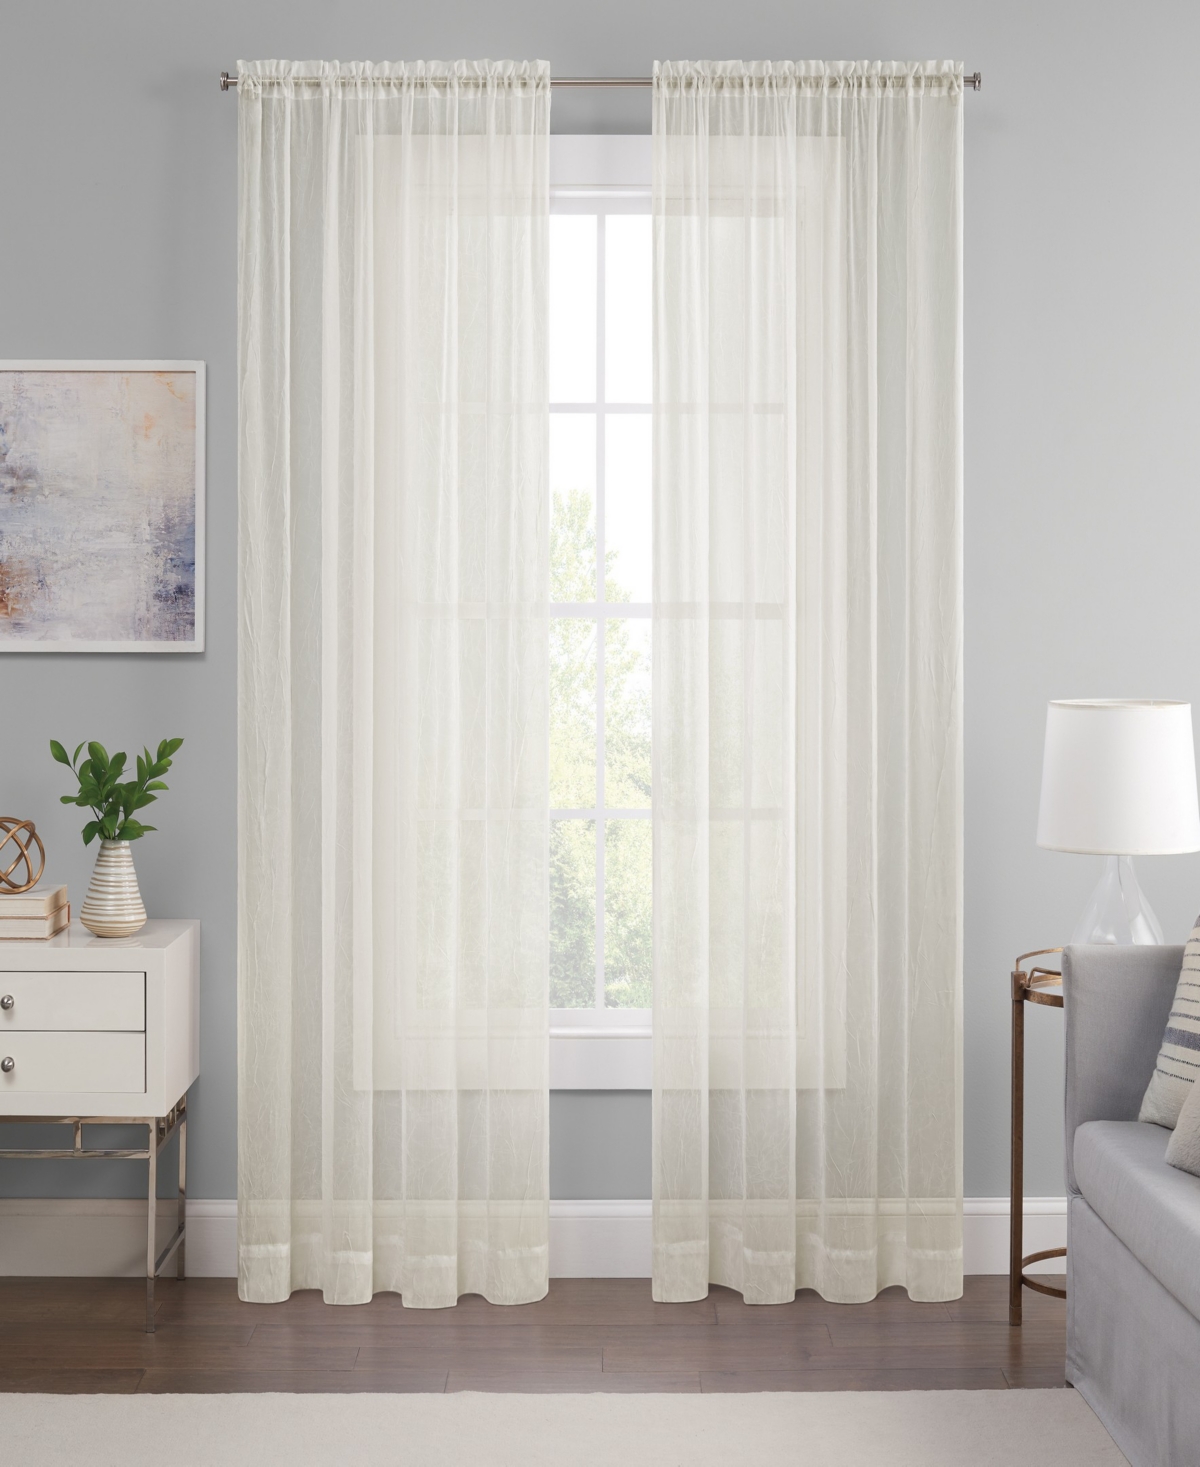 Eclipse Emina Crushed Sheer Voile Rod Pocket Curtain Panel, 52" X 84" In Ivory